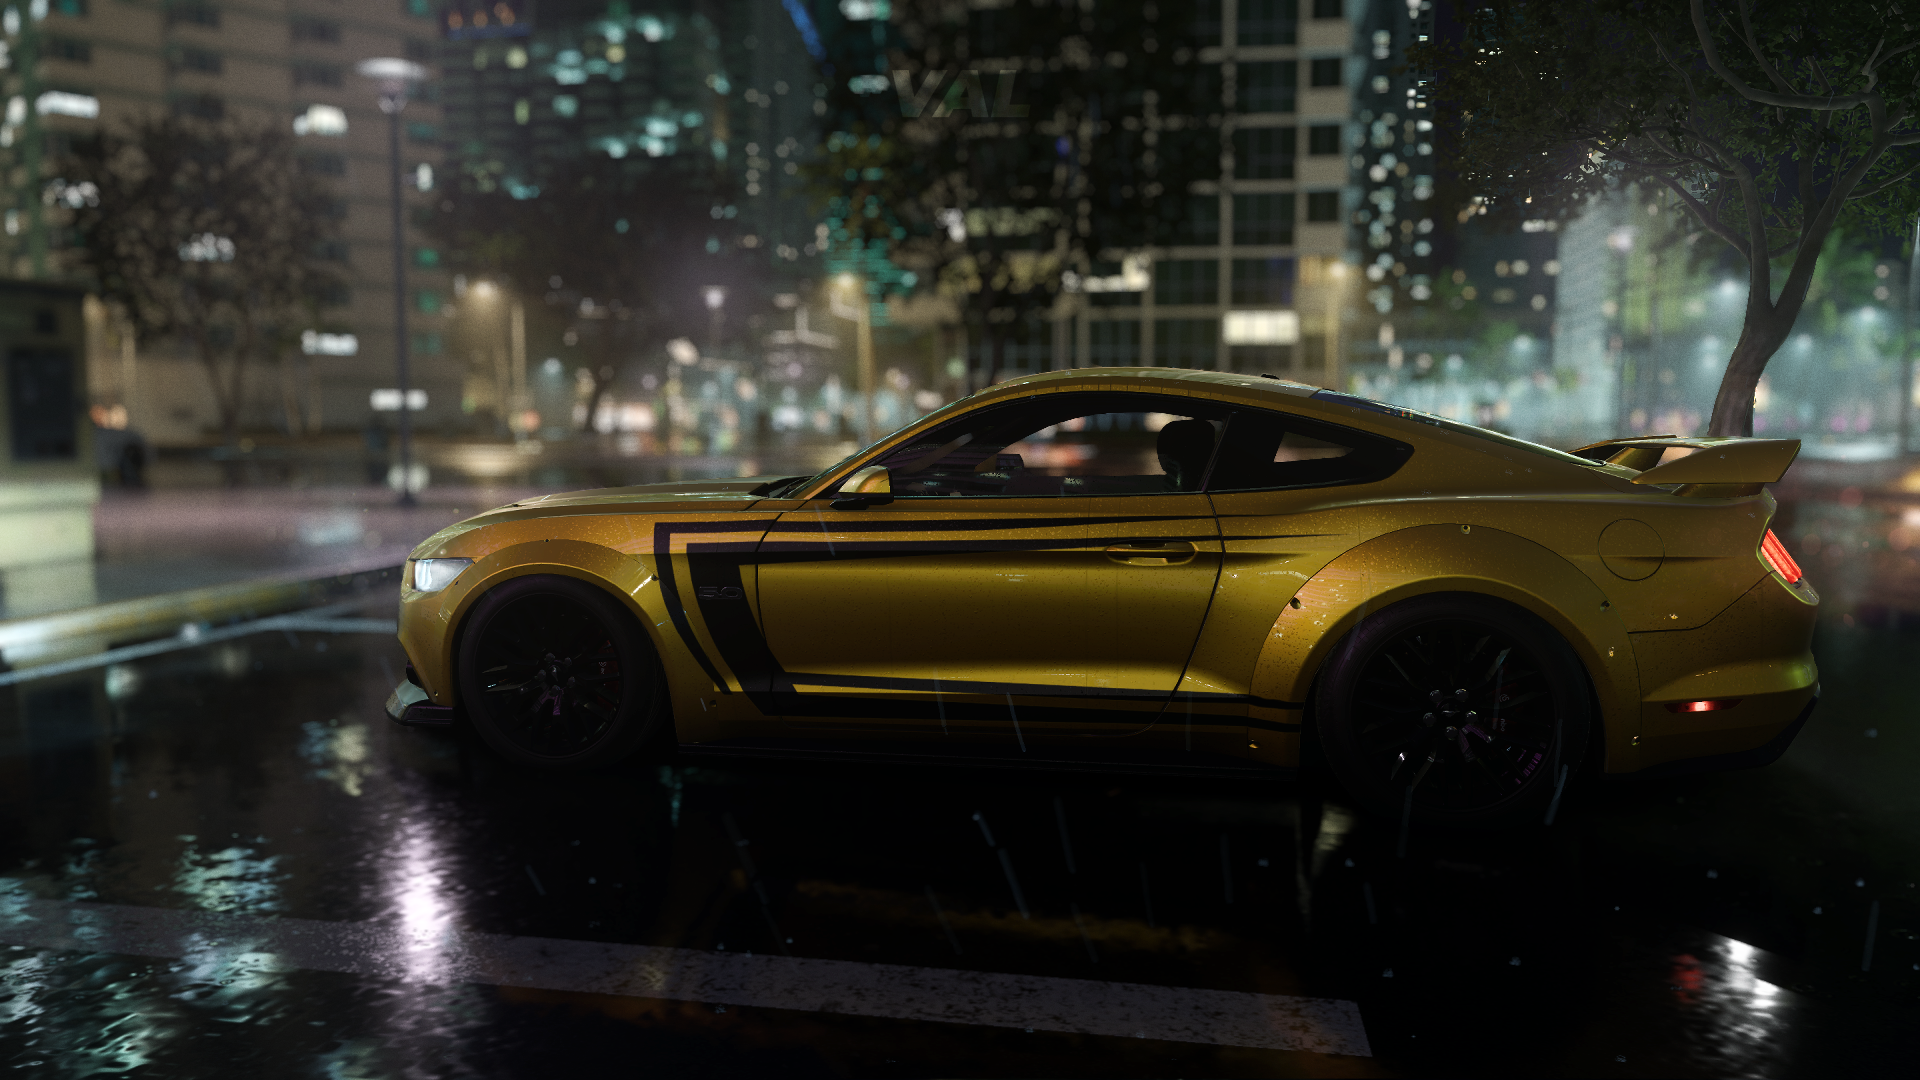 Ford Mustang Ford Mustang Gt S550 Yellow Cars Car Muscle Cars American Cars Need For Speed Heat 1920x1080